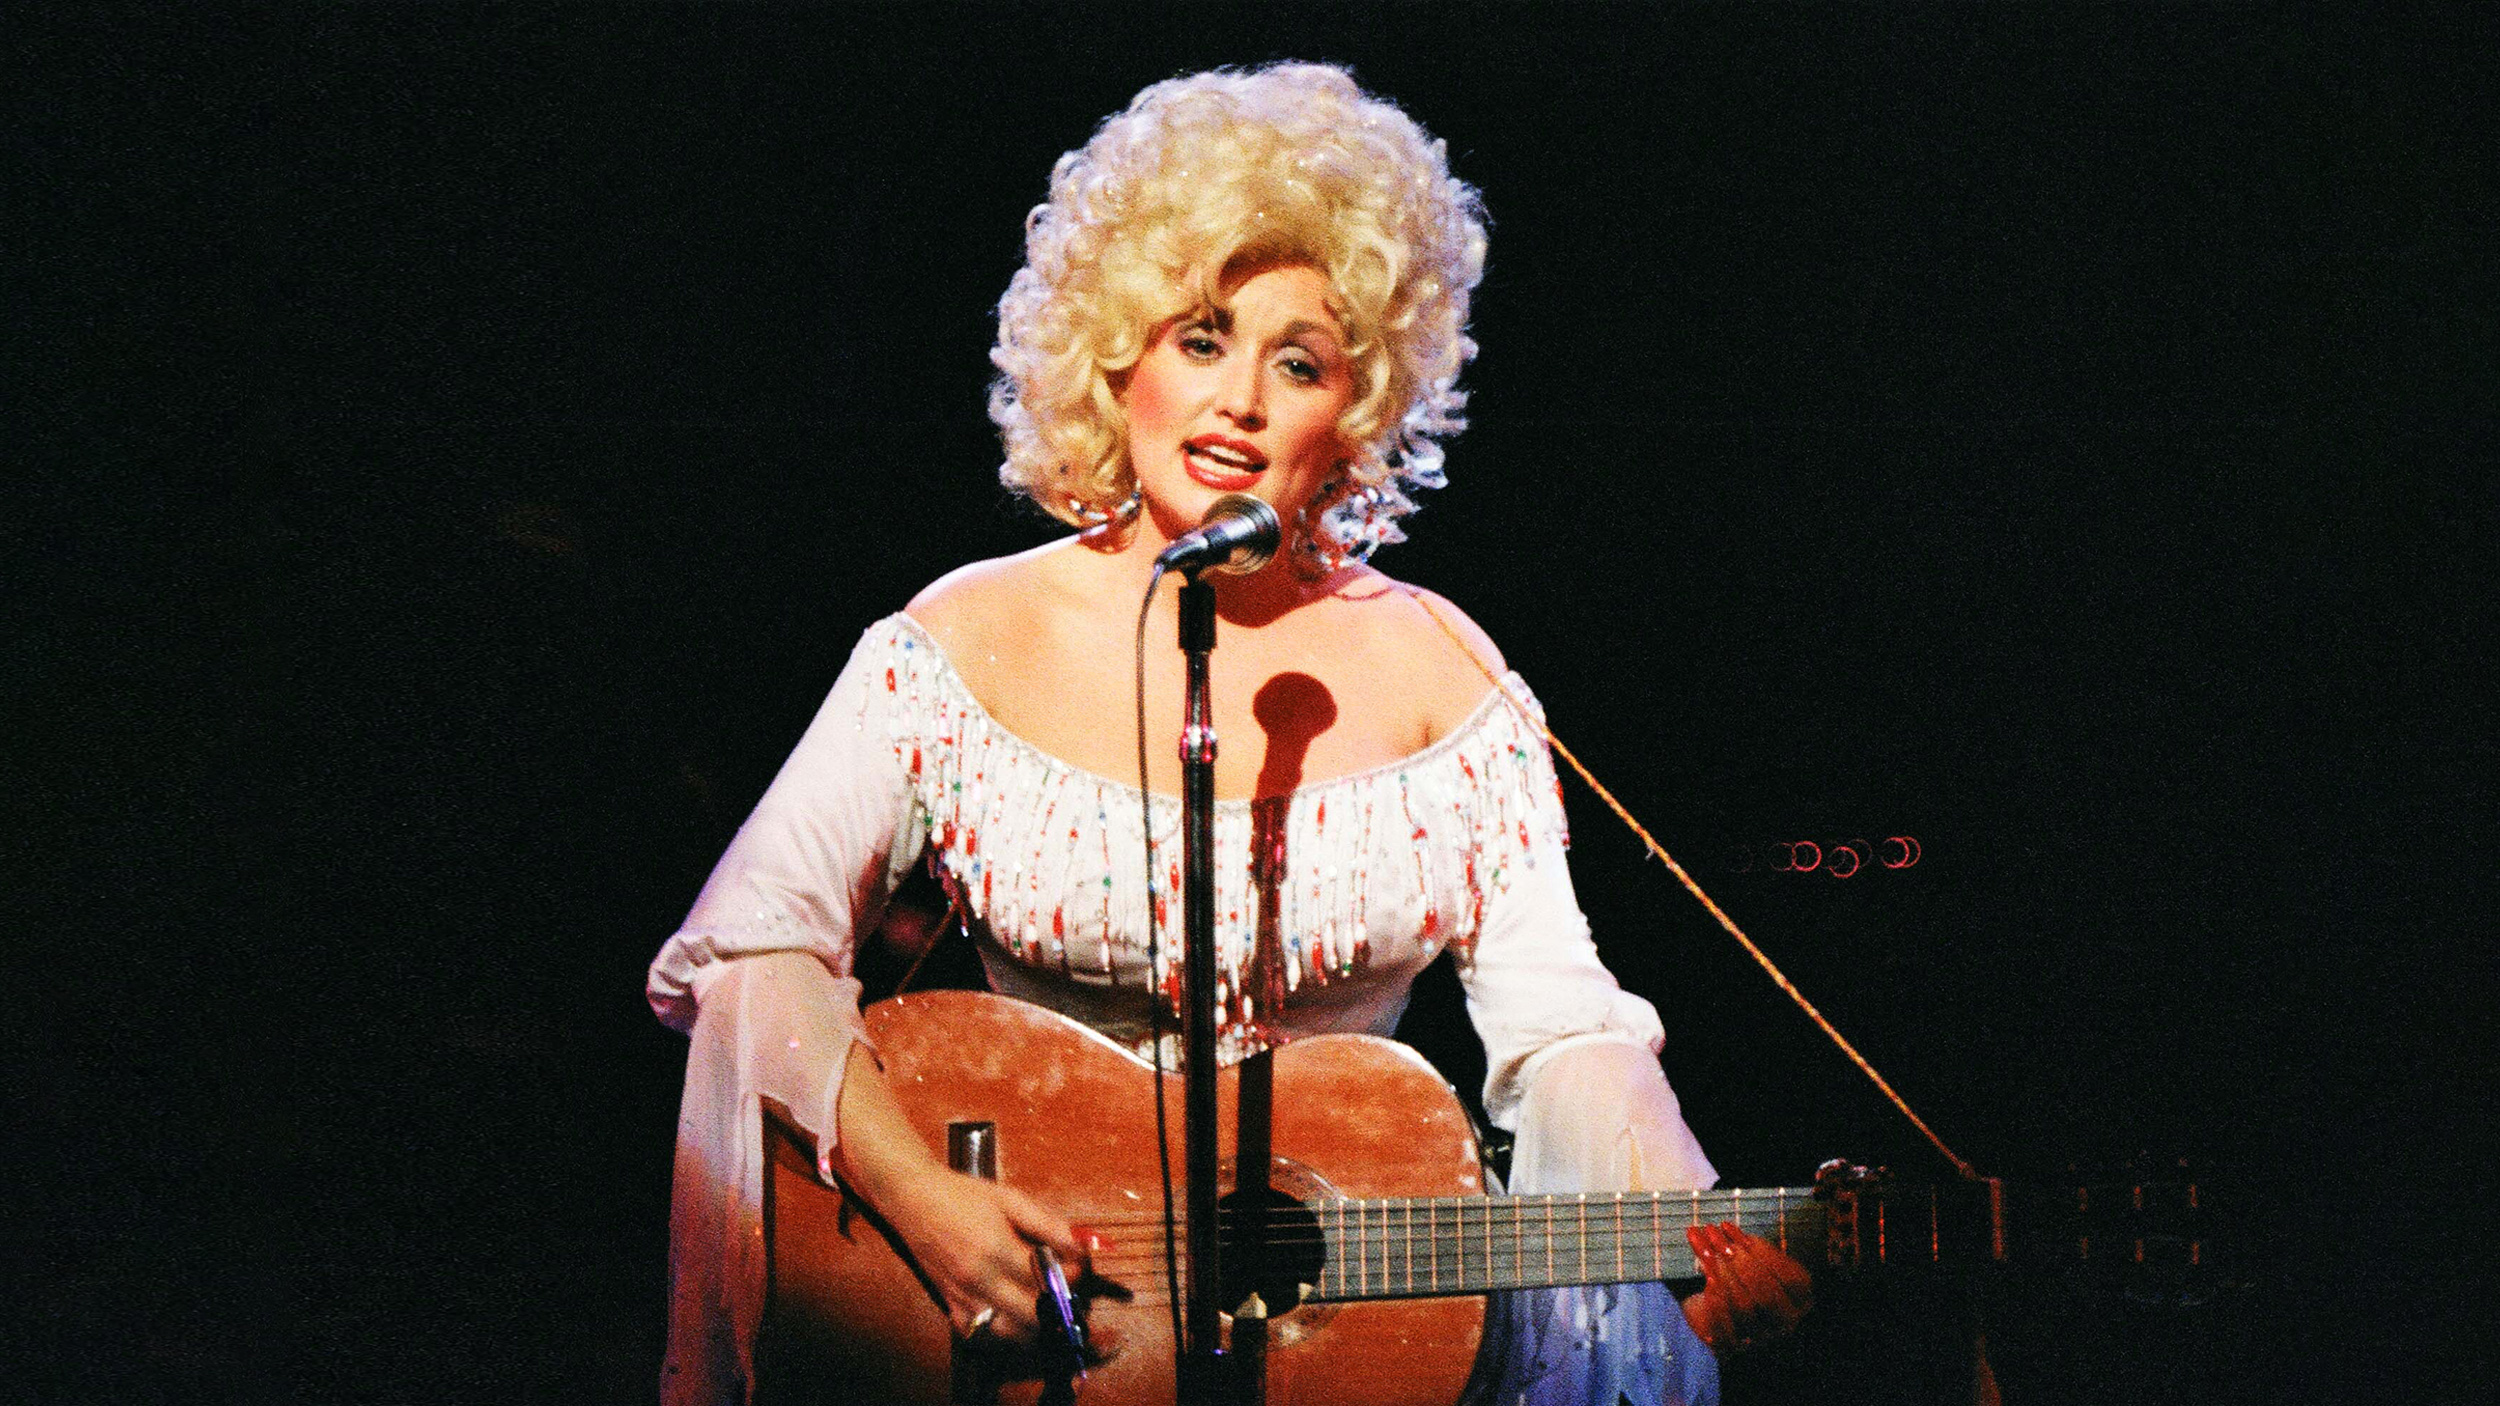 Dolly Parton on stage with an acoustic guitar showcases her musical talent.